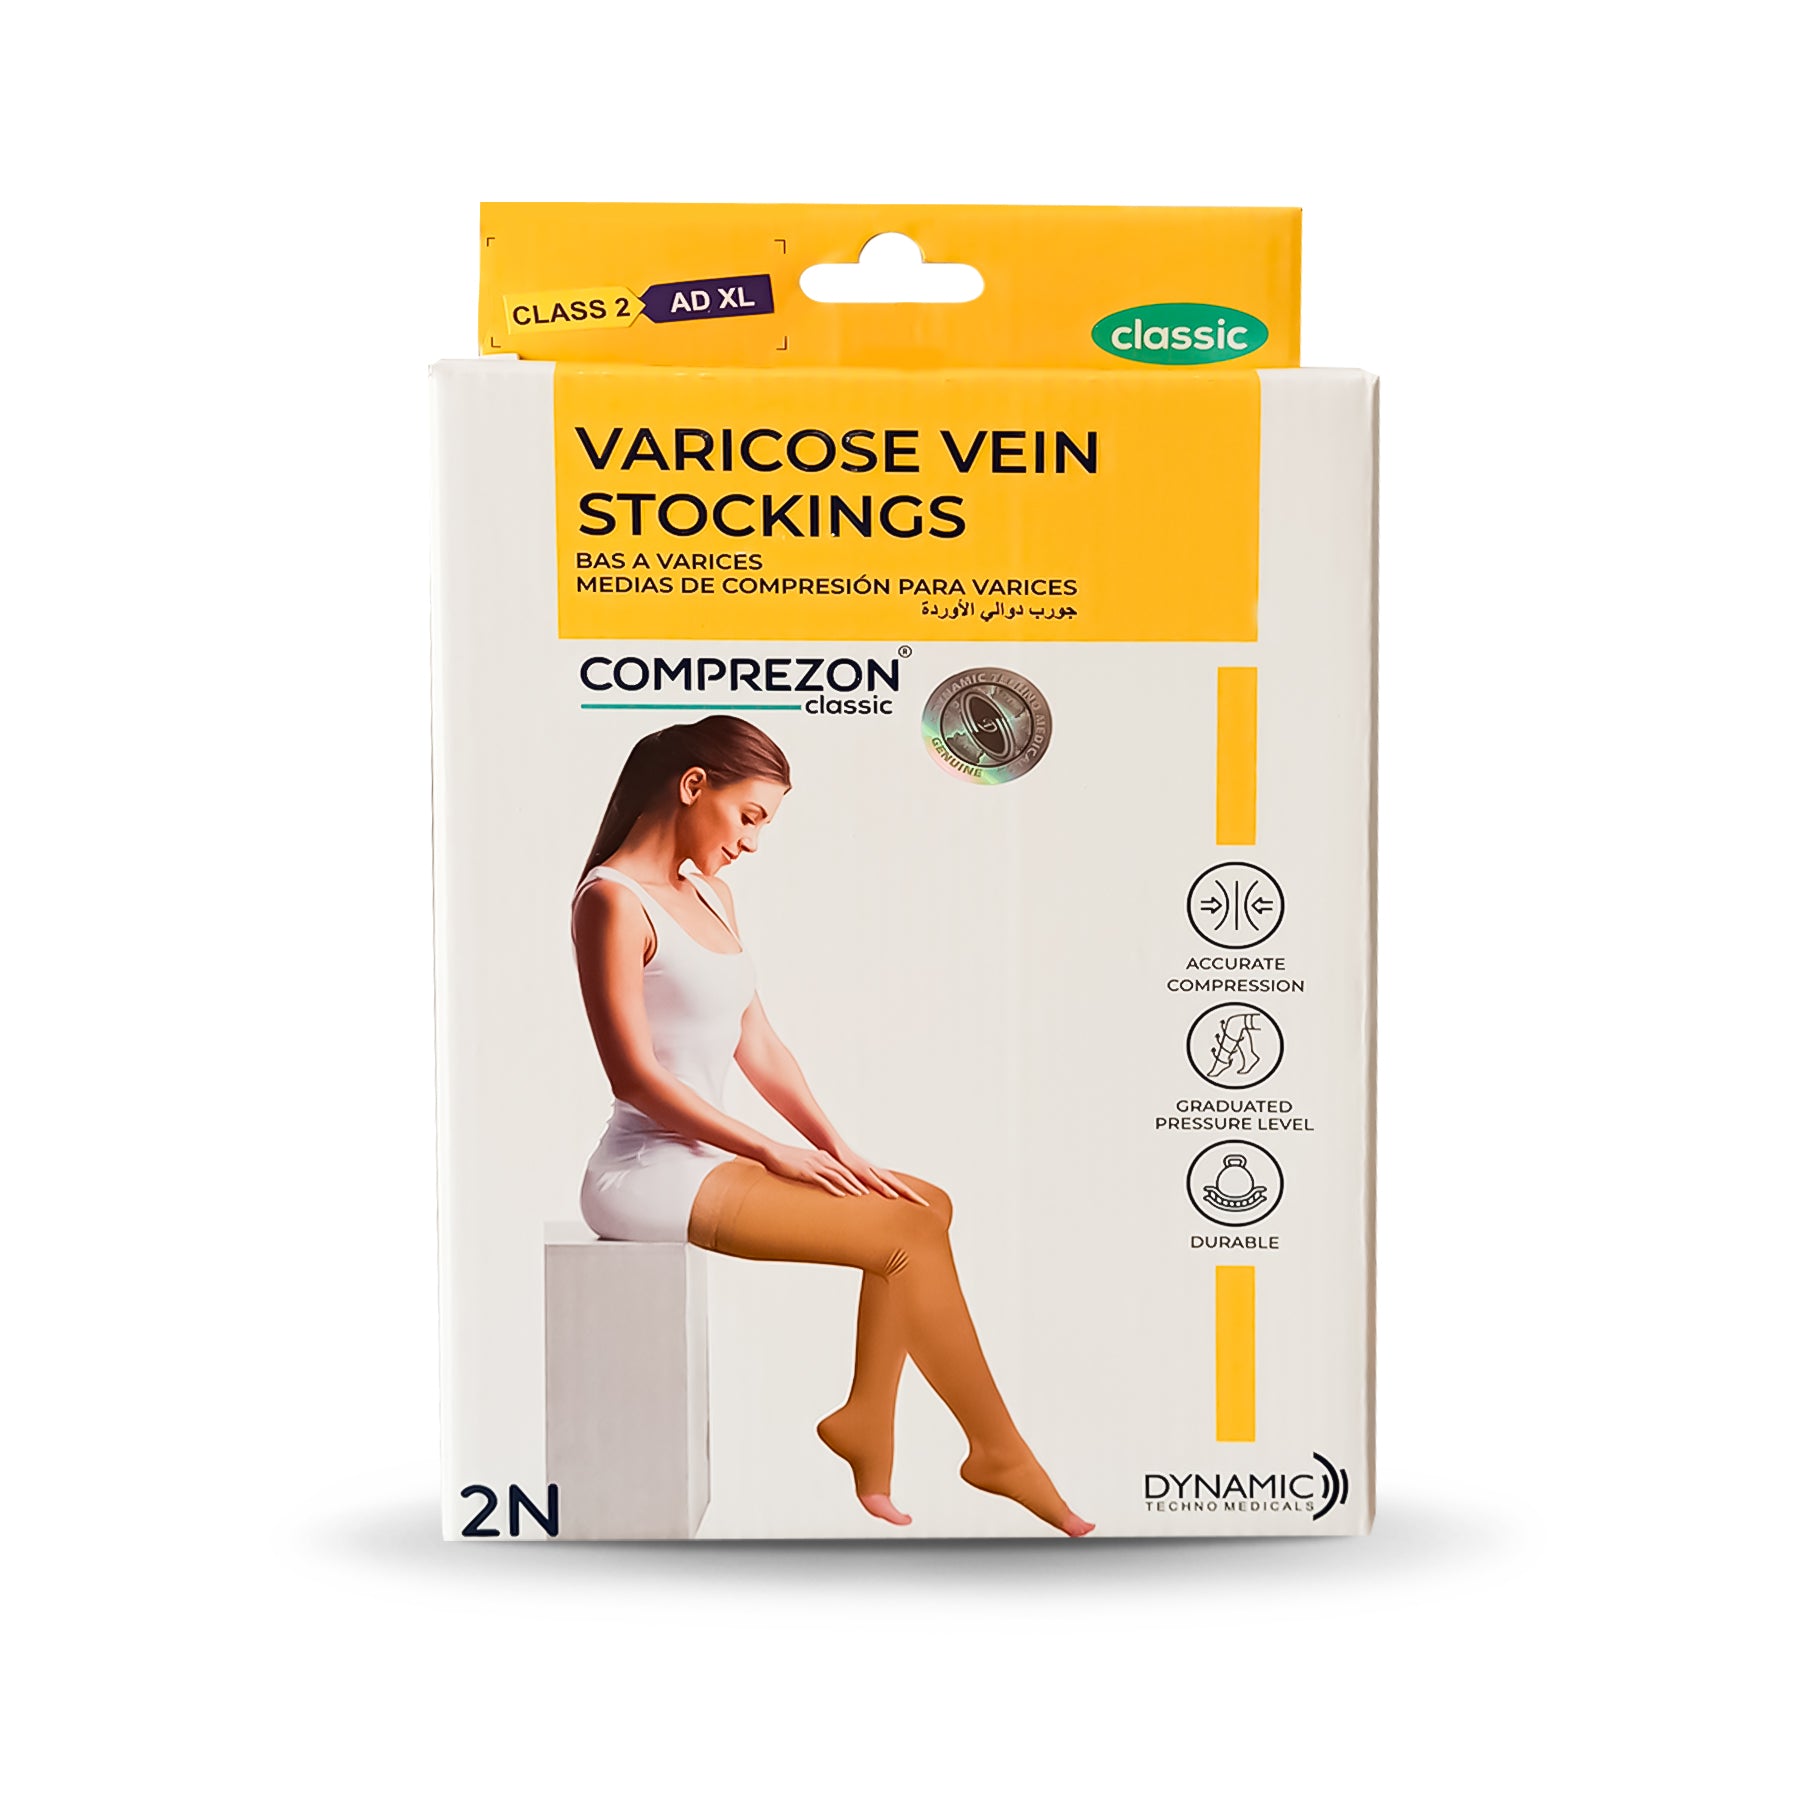 DYNA Comprezone Varicose Vein Stockings AD [CLASS II]